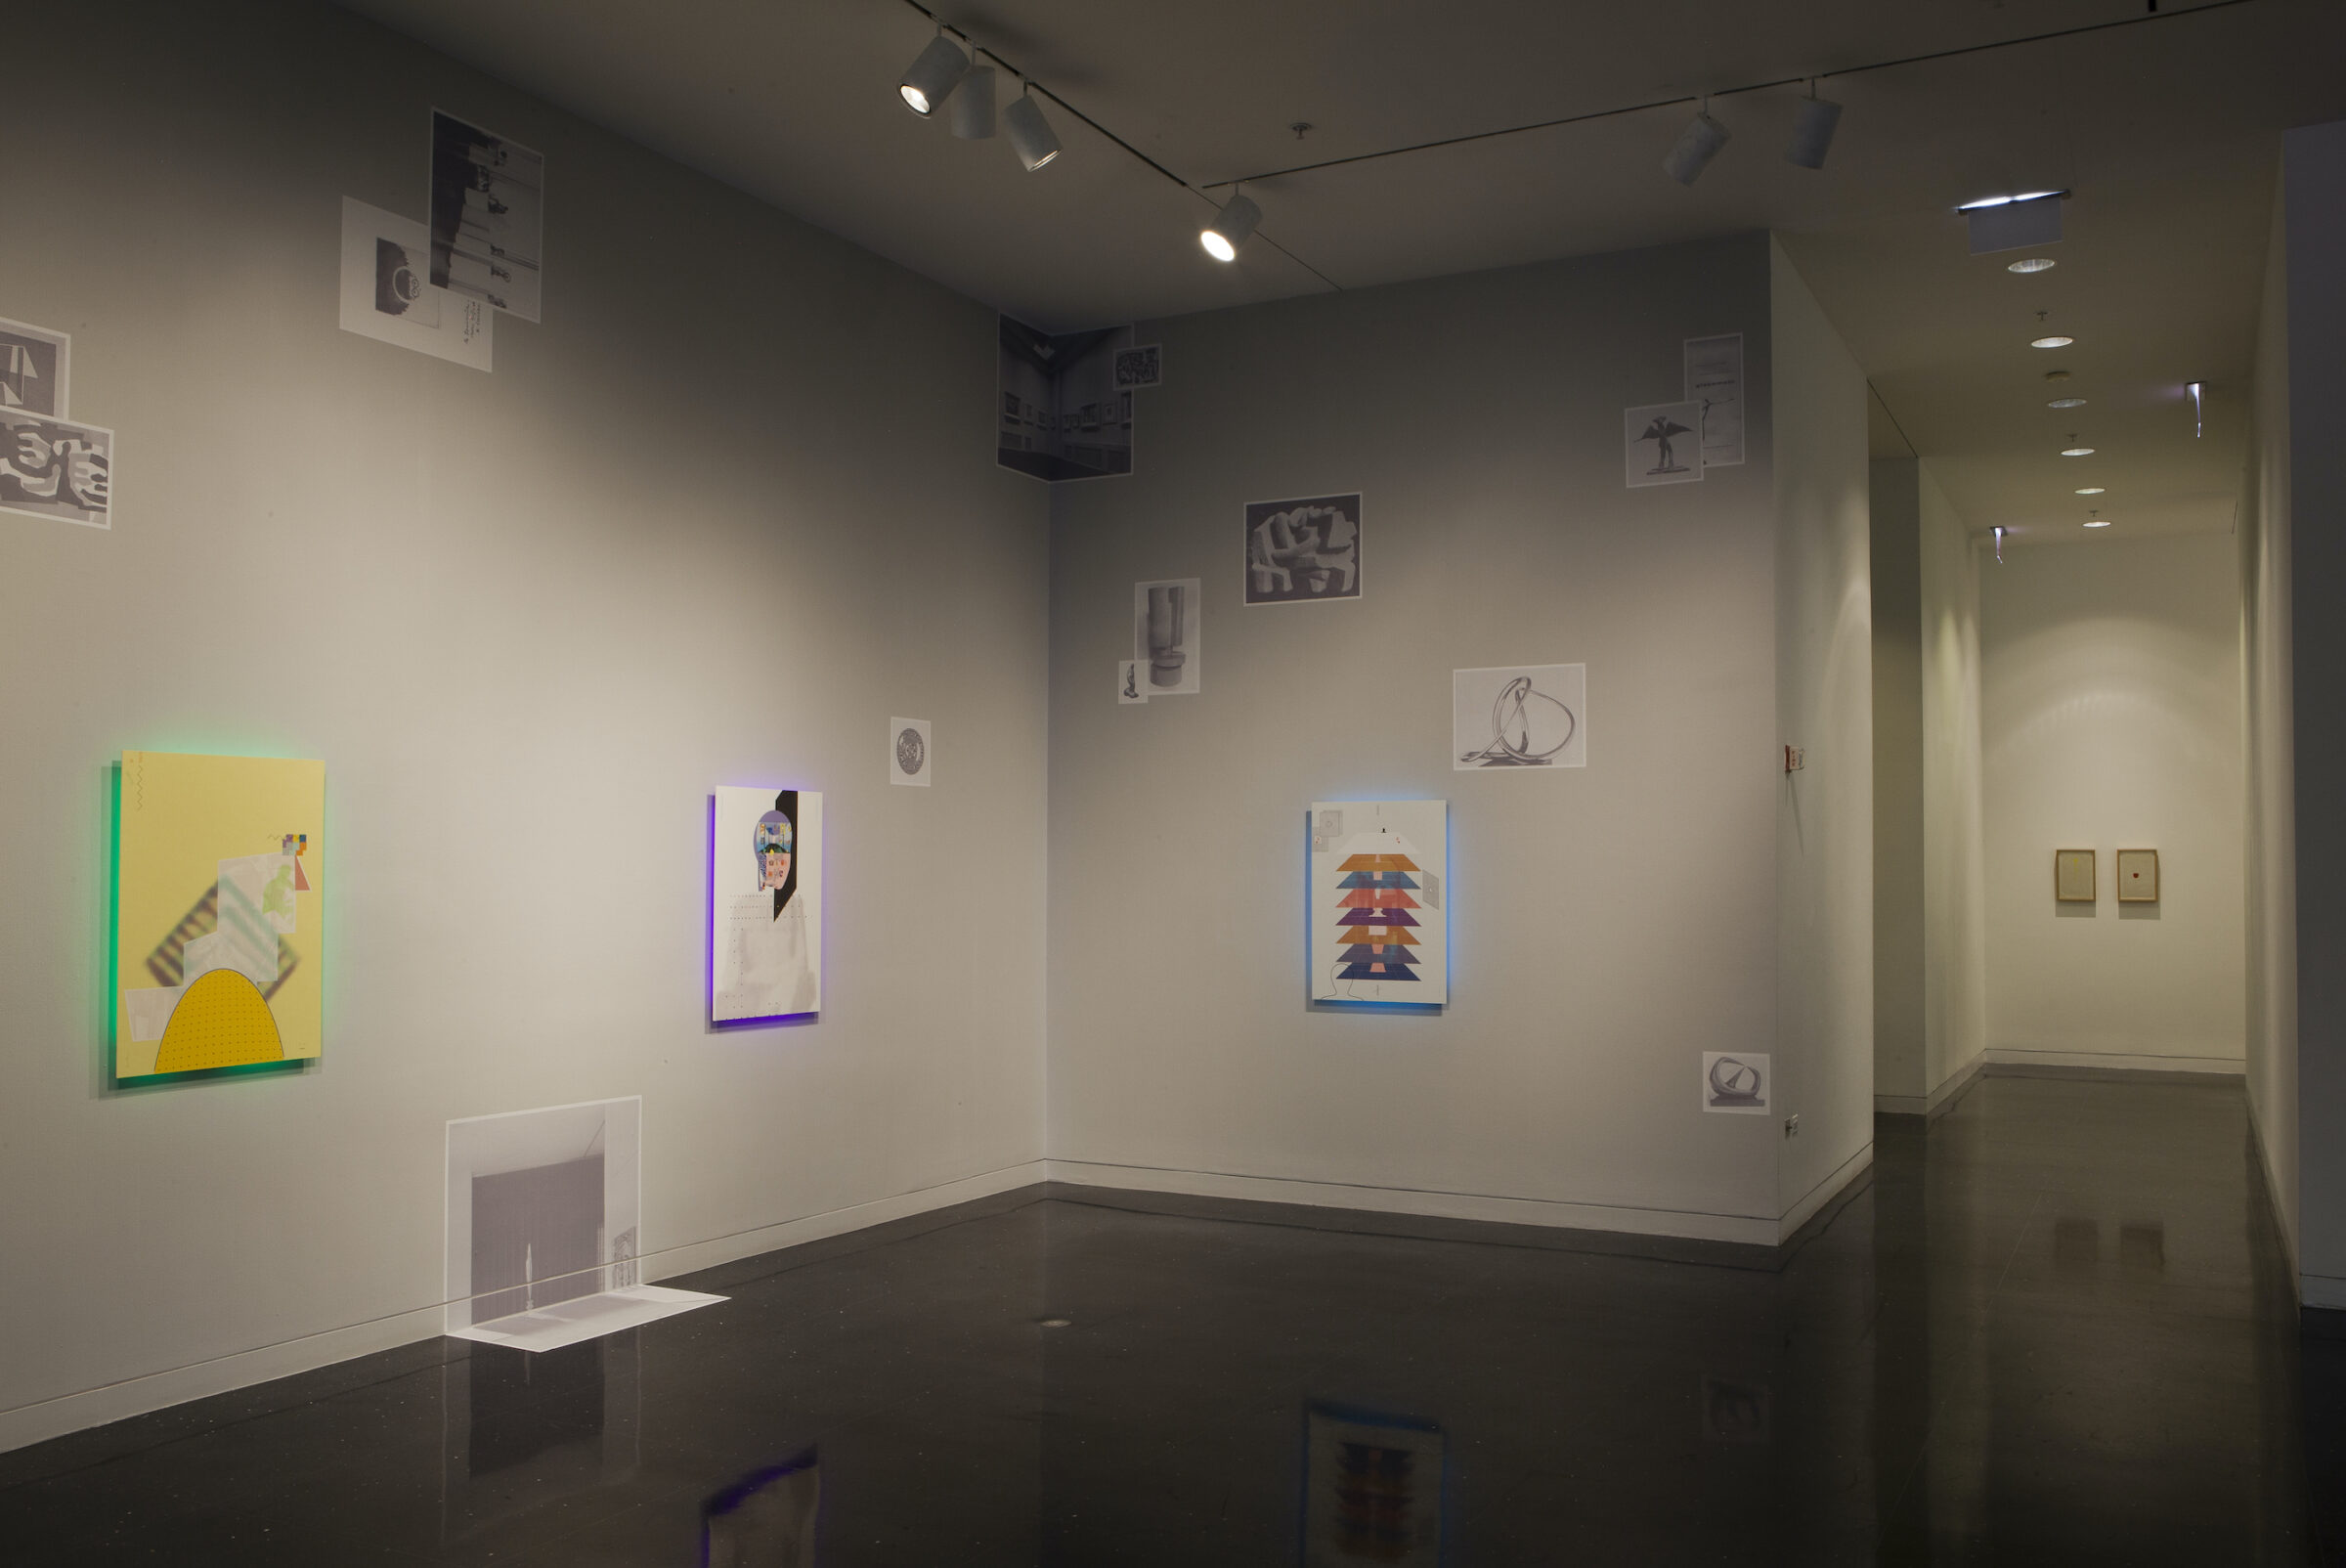 A dimly lit gallery space with colorful drawings hung on the walls.